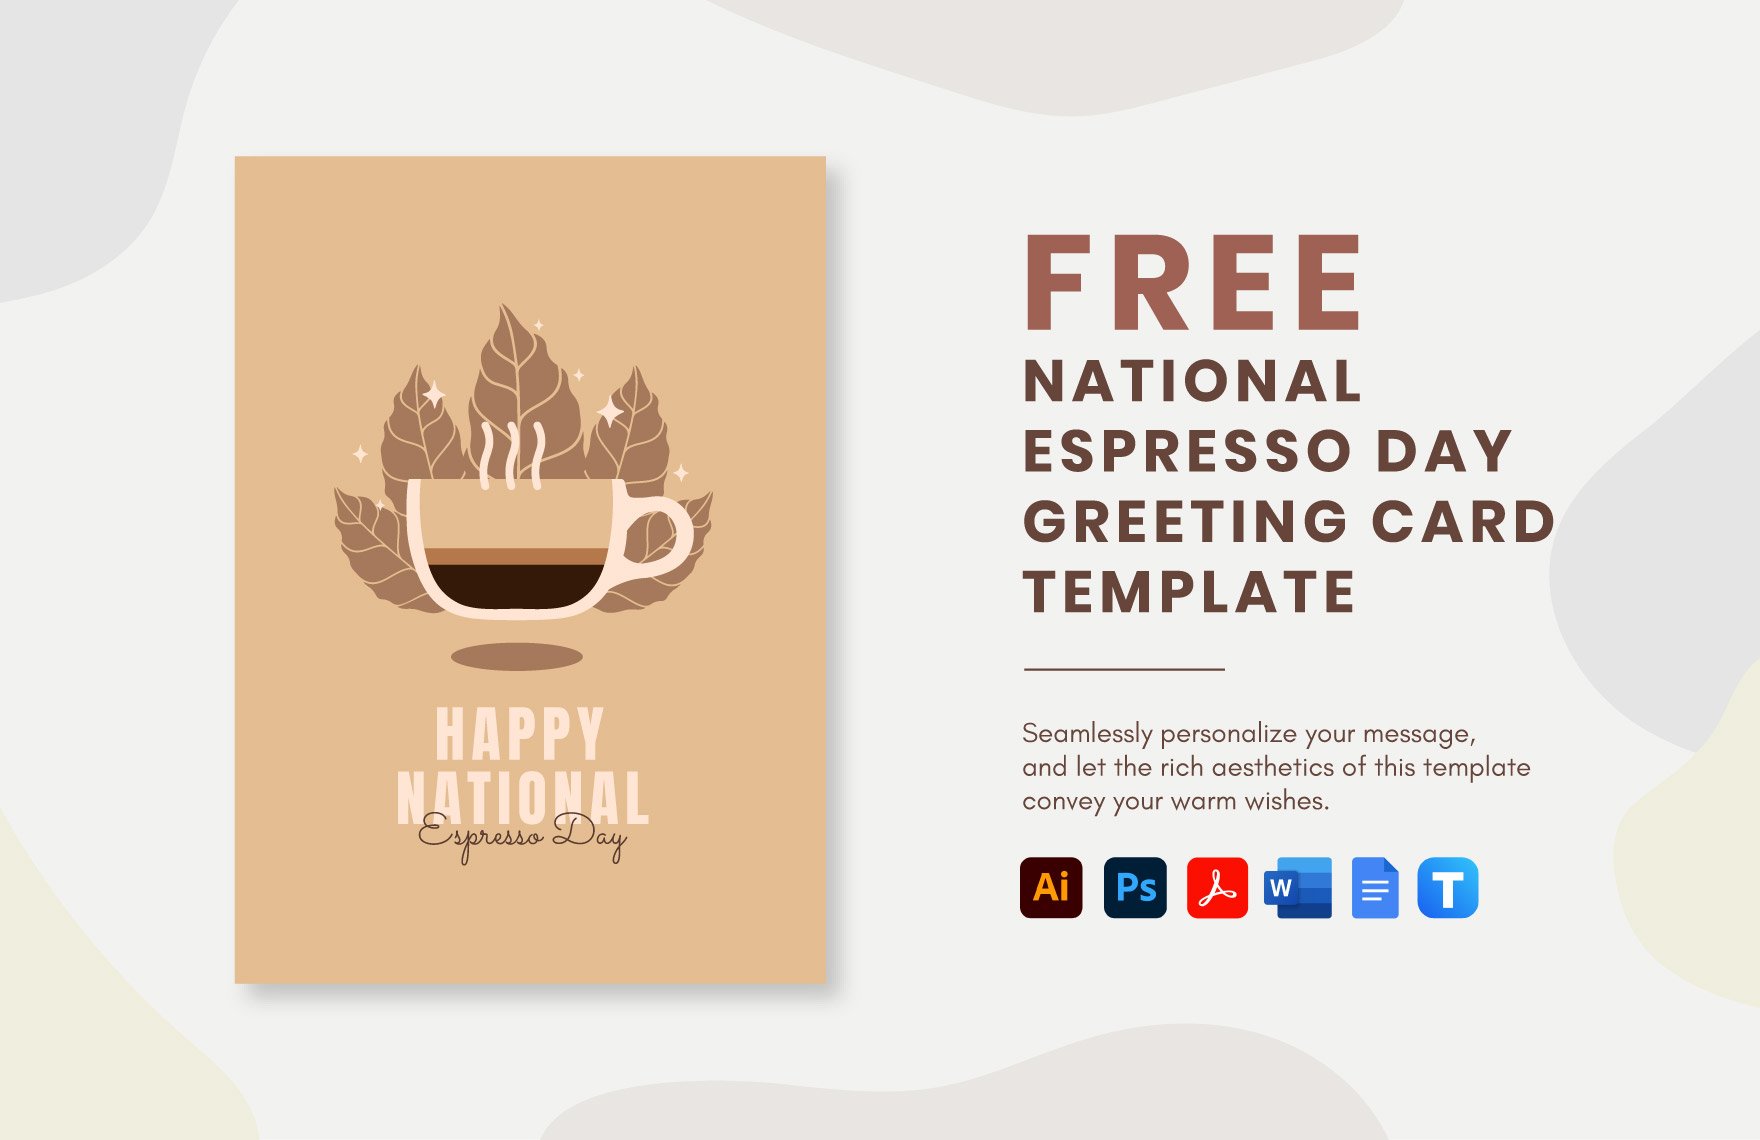 National Espresso Day Greeting Card Template